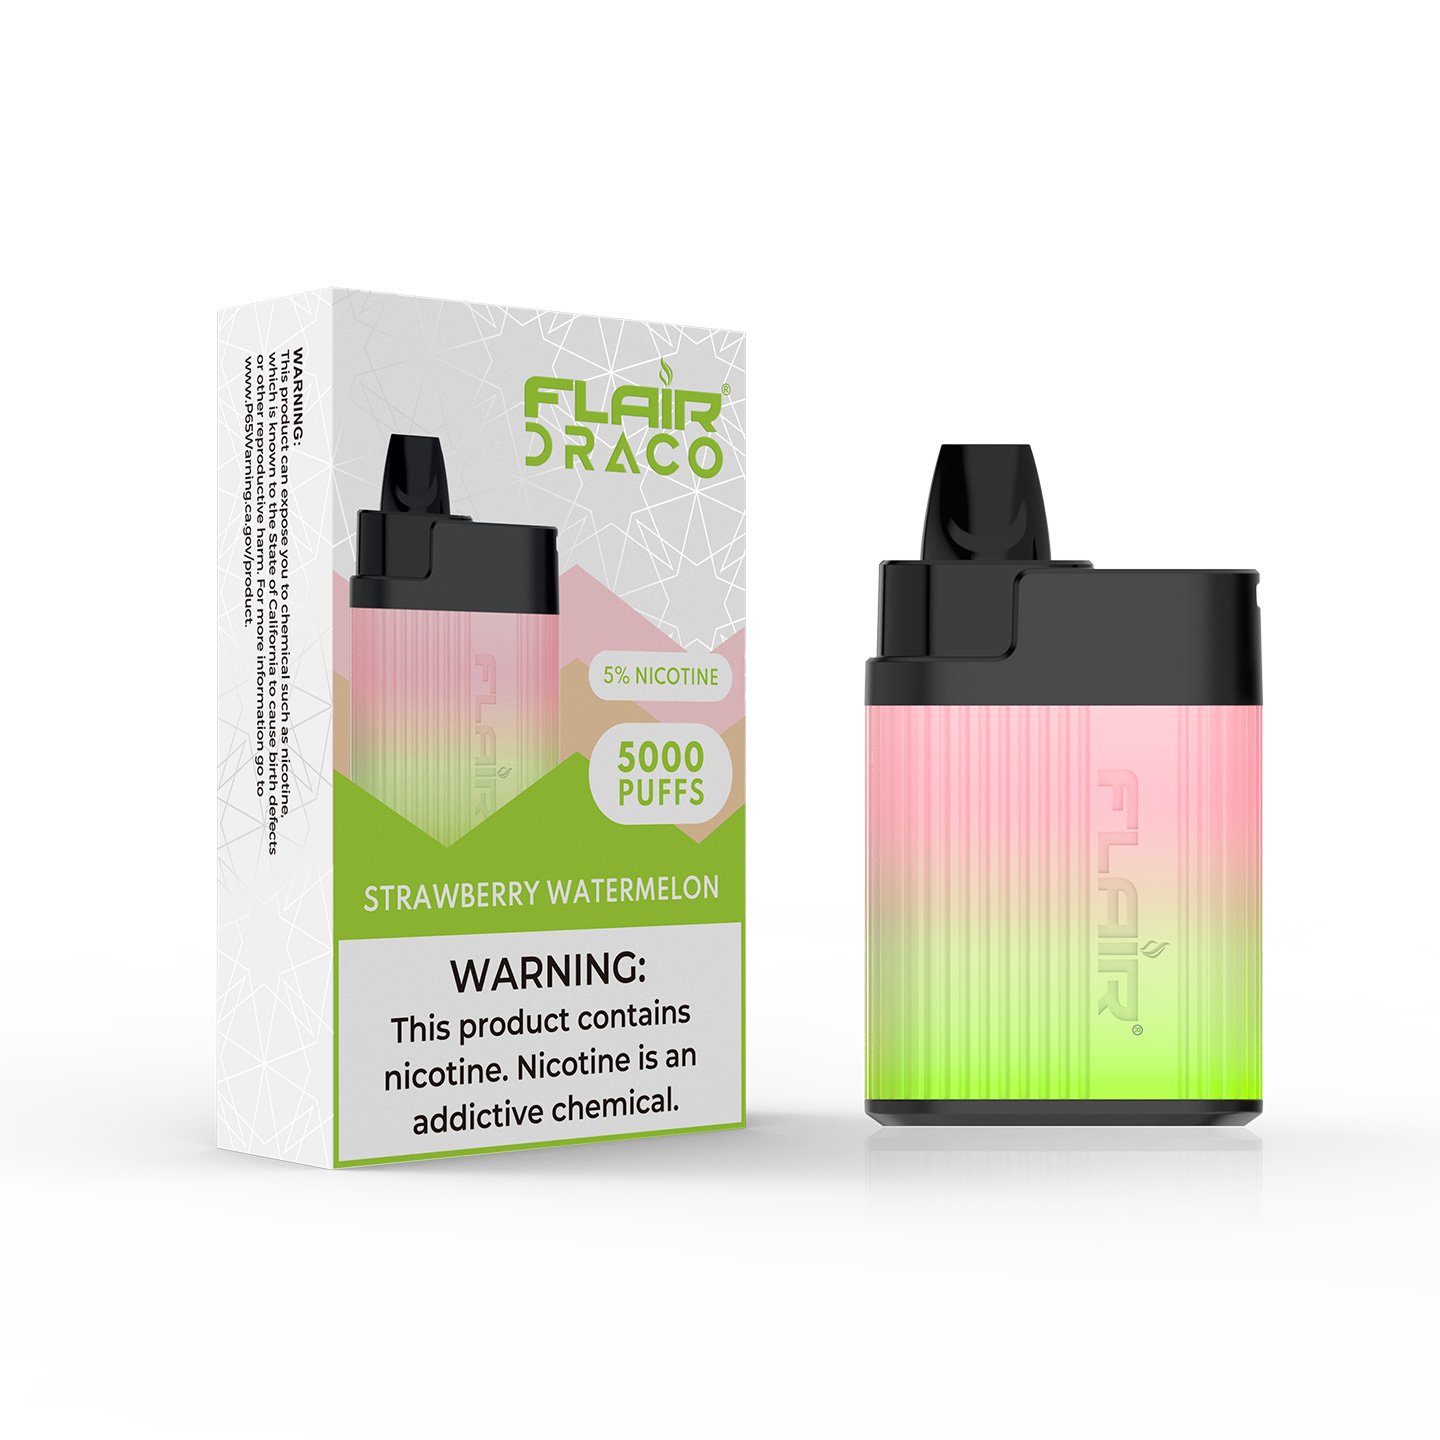 Flair Draco Disposable Device (Strawberry Watermelon - 5000 Puffs)